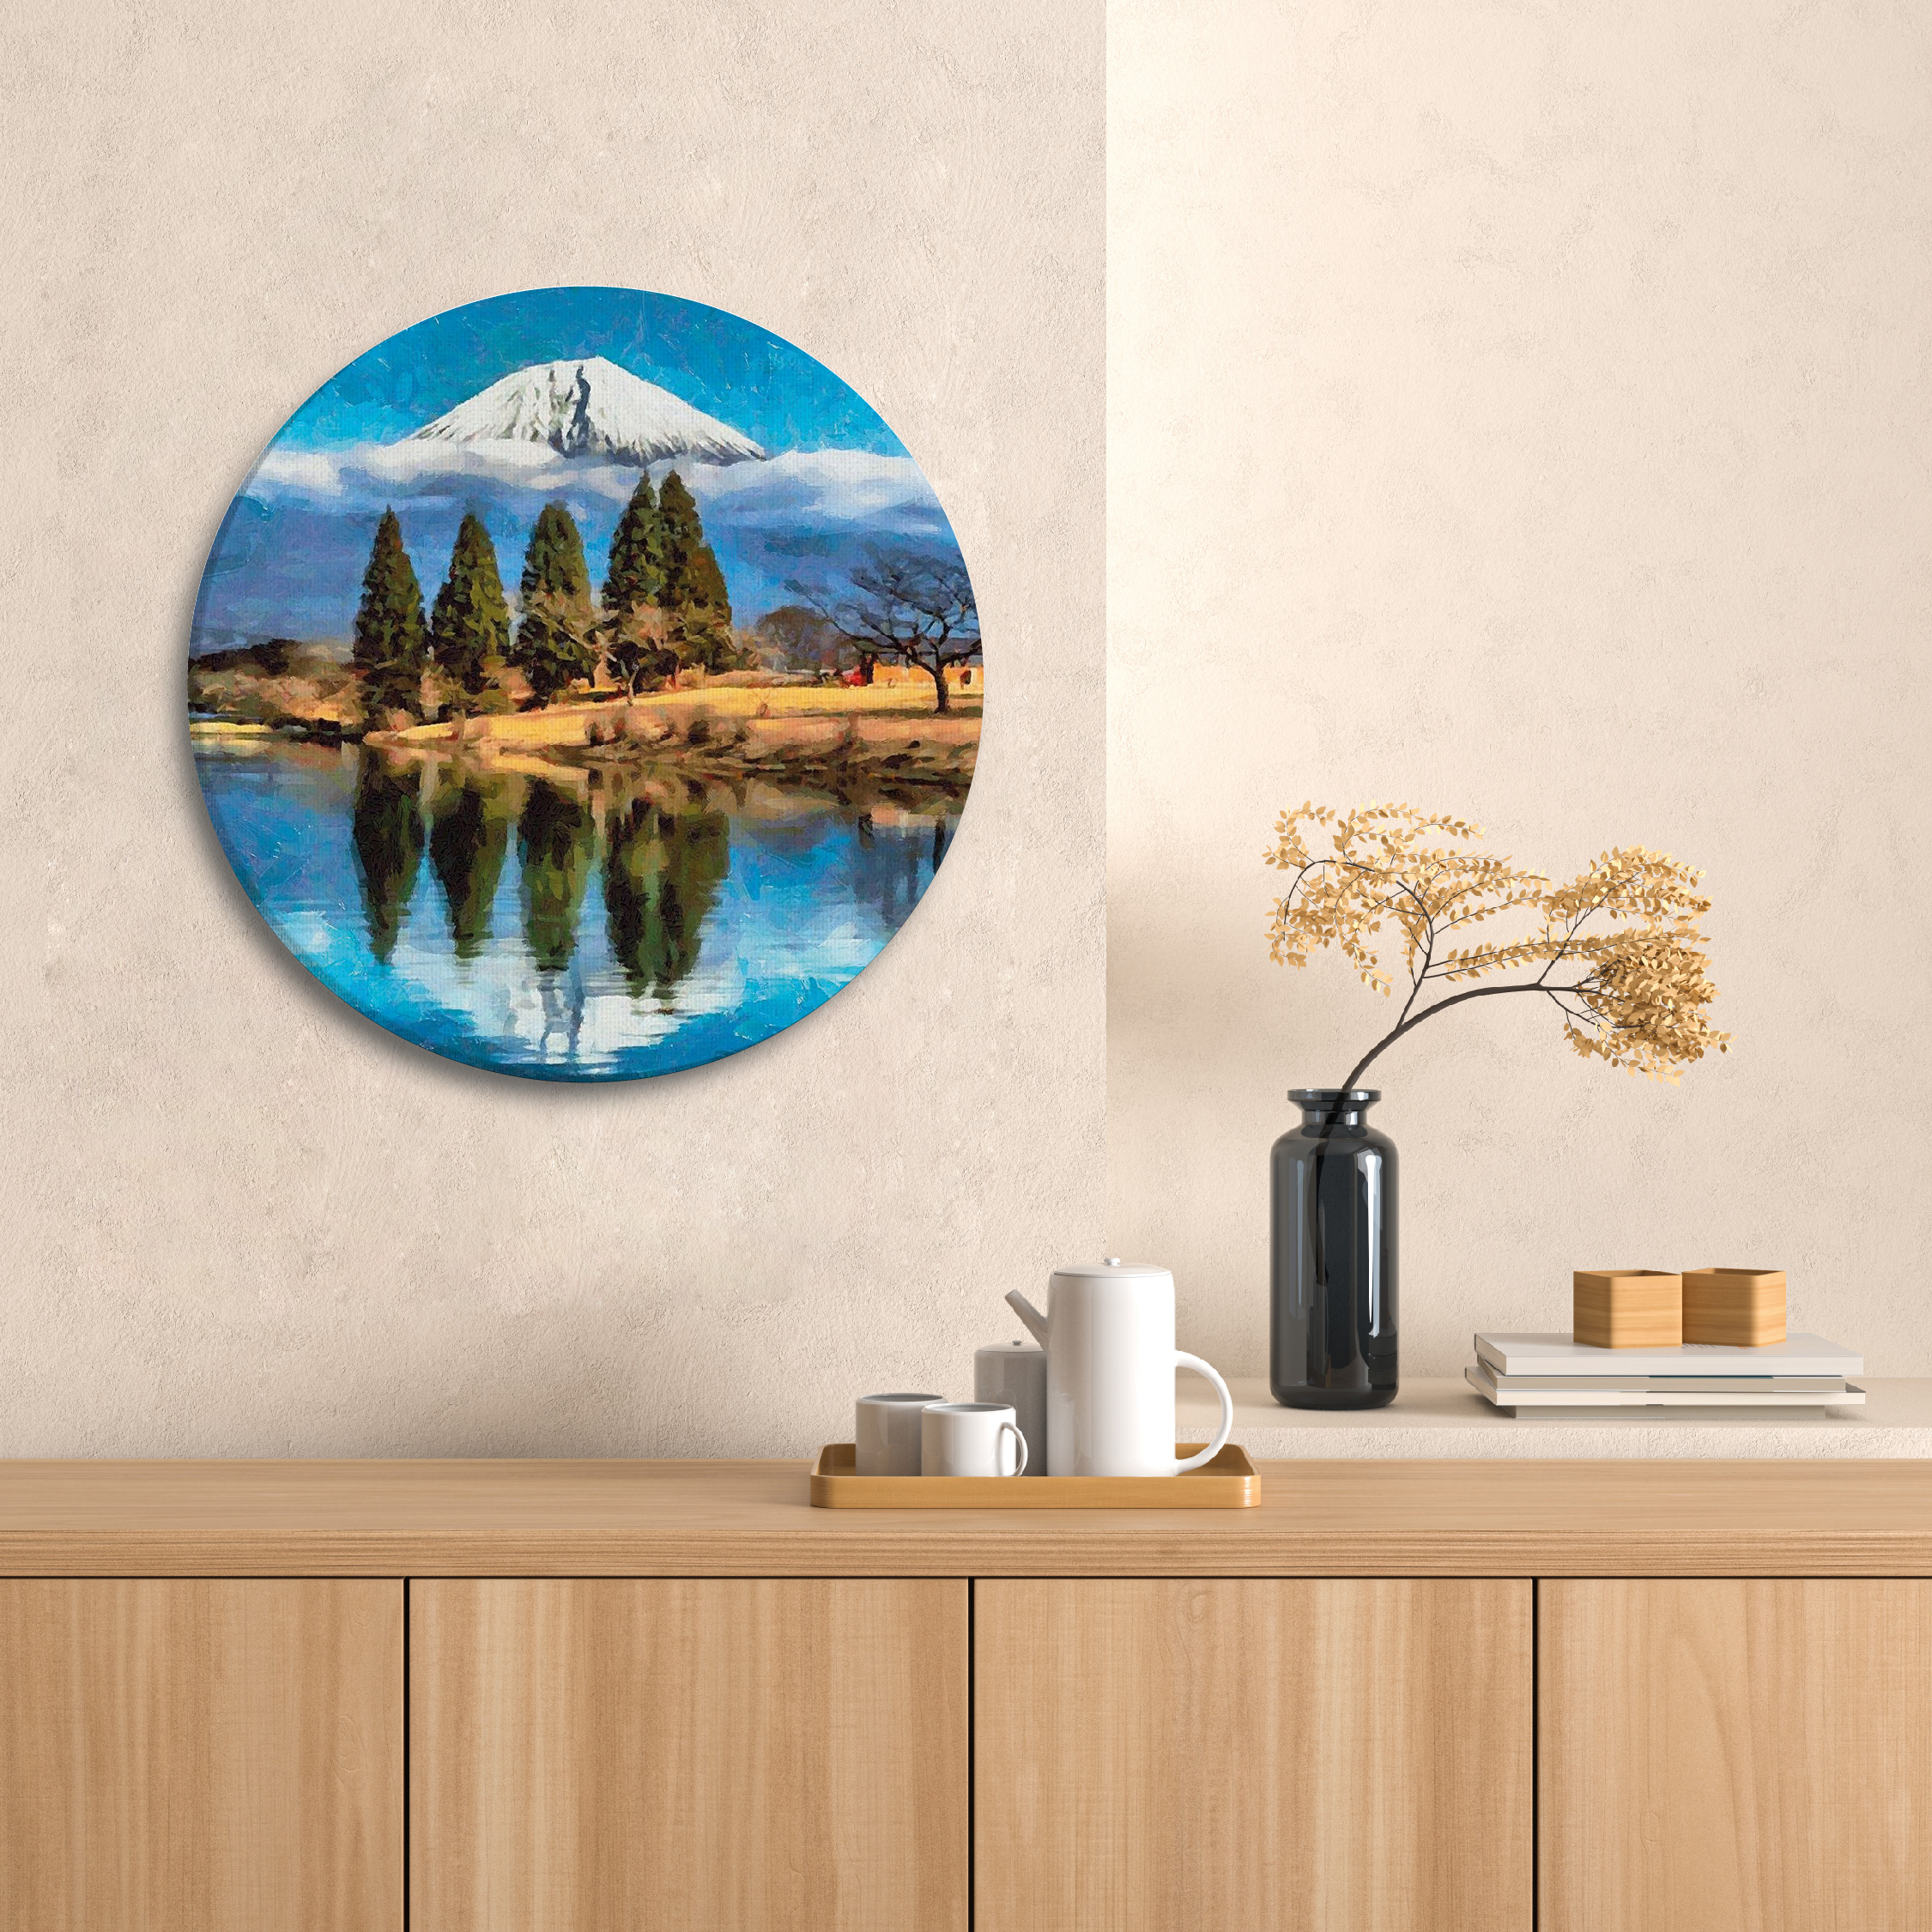 Set of round shaped wall art painting,